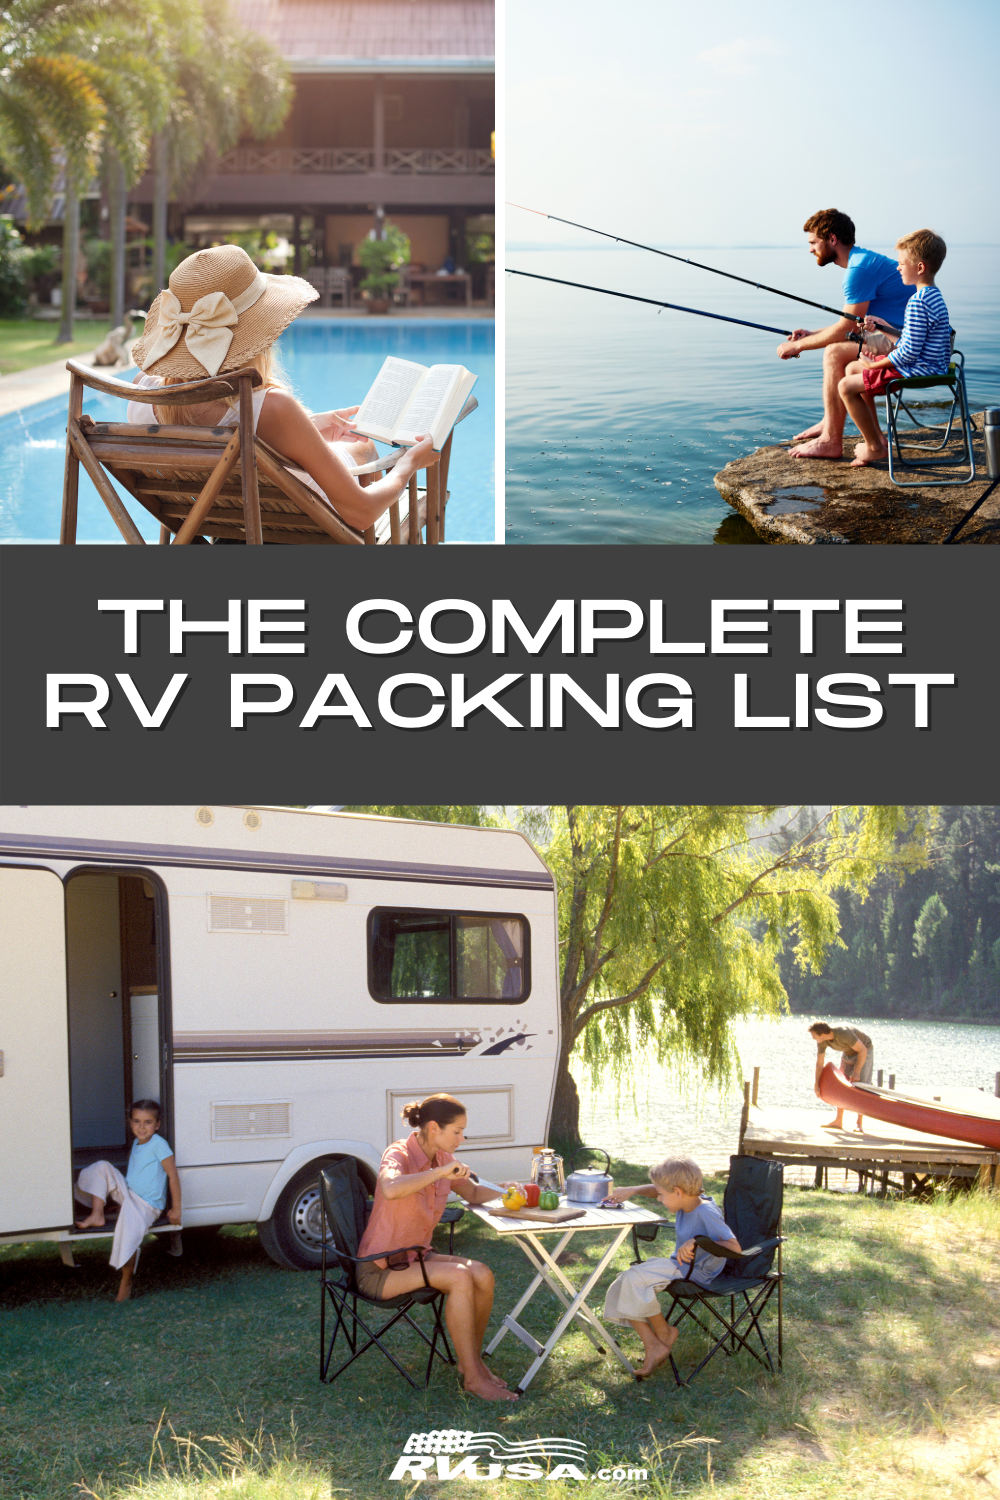 A few photos of RVers enjoying things like reading, fishing and eating outside. Text reads "The Complete RV Packing List"